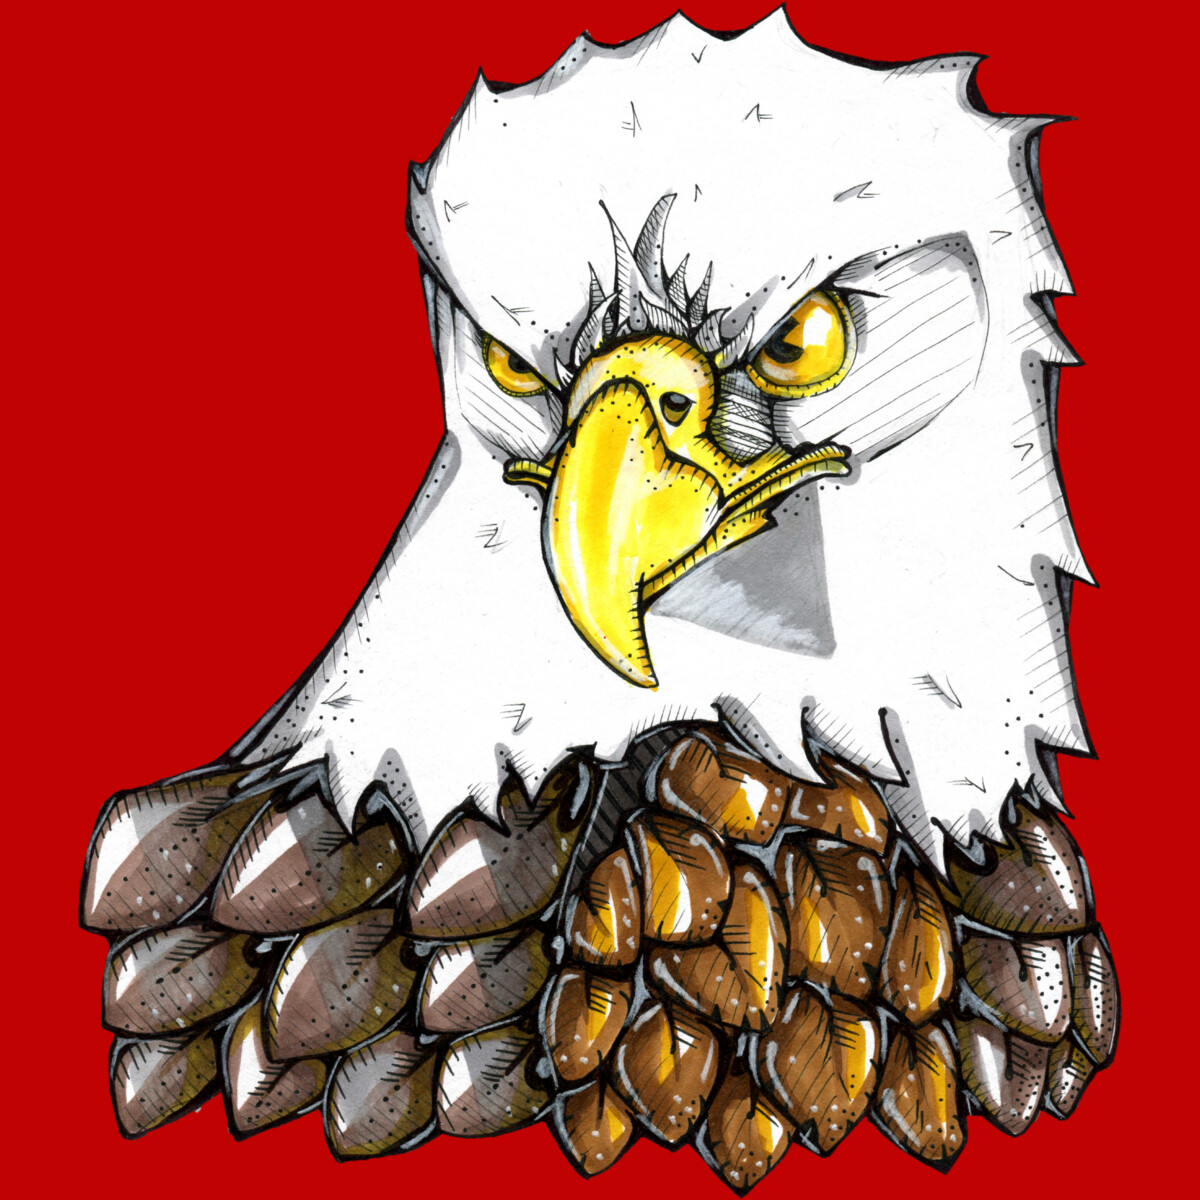 Maverick the Bald Eagle Mens Red Graphic Tank Top - Design By Humans  2XL - image 2 of 3